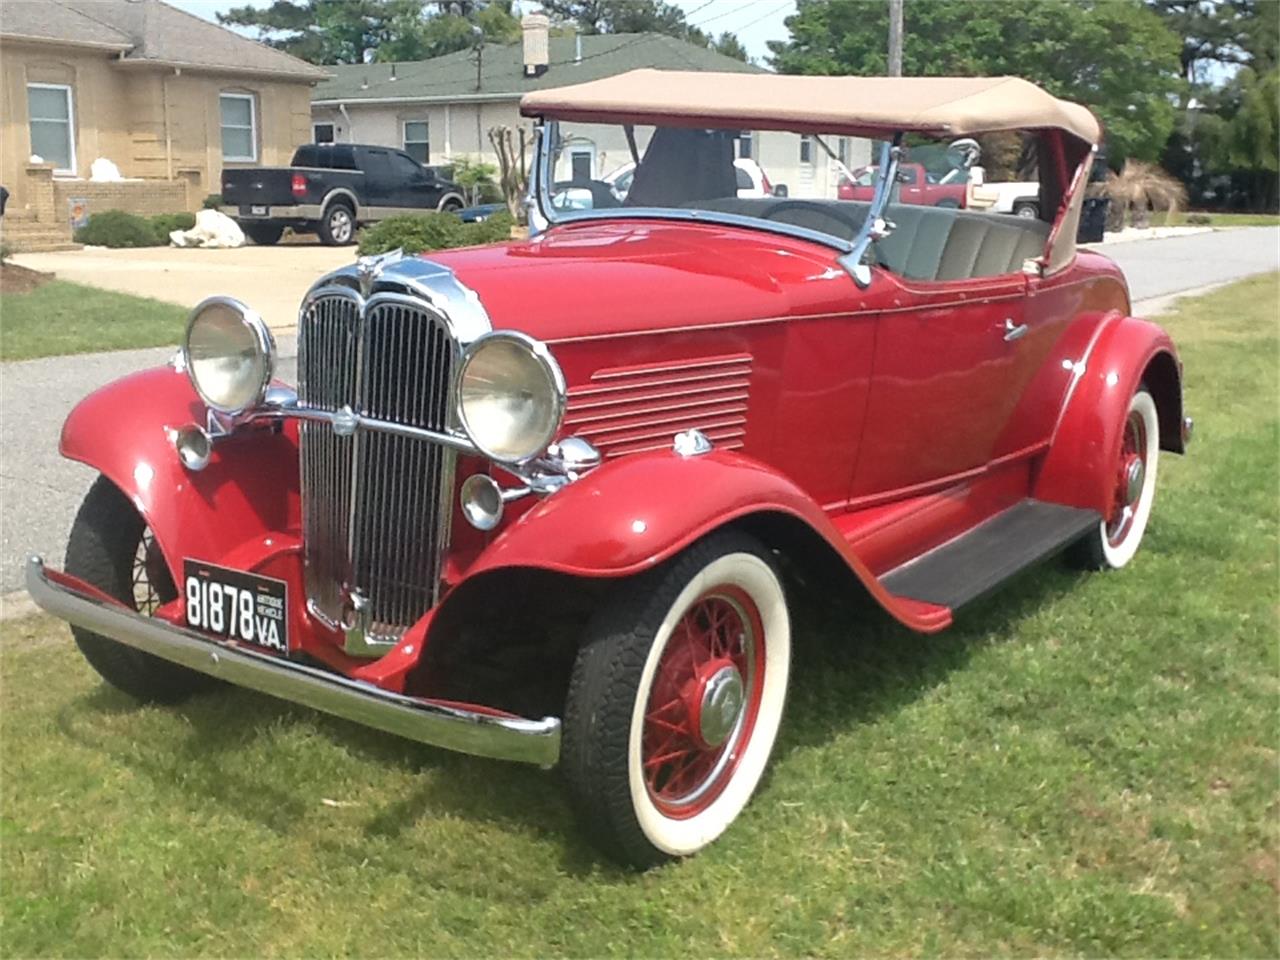 1932 Willys Roadster Model 6-90 - USA